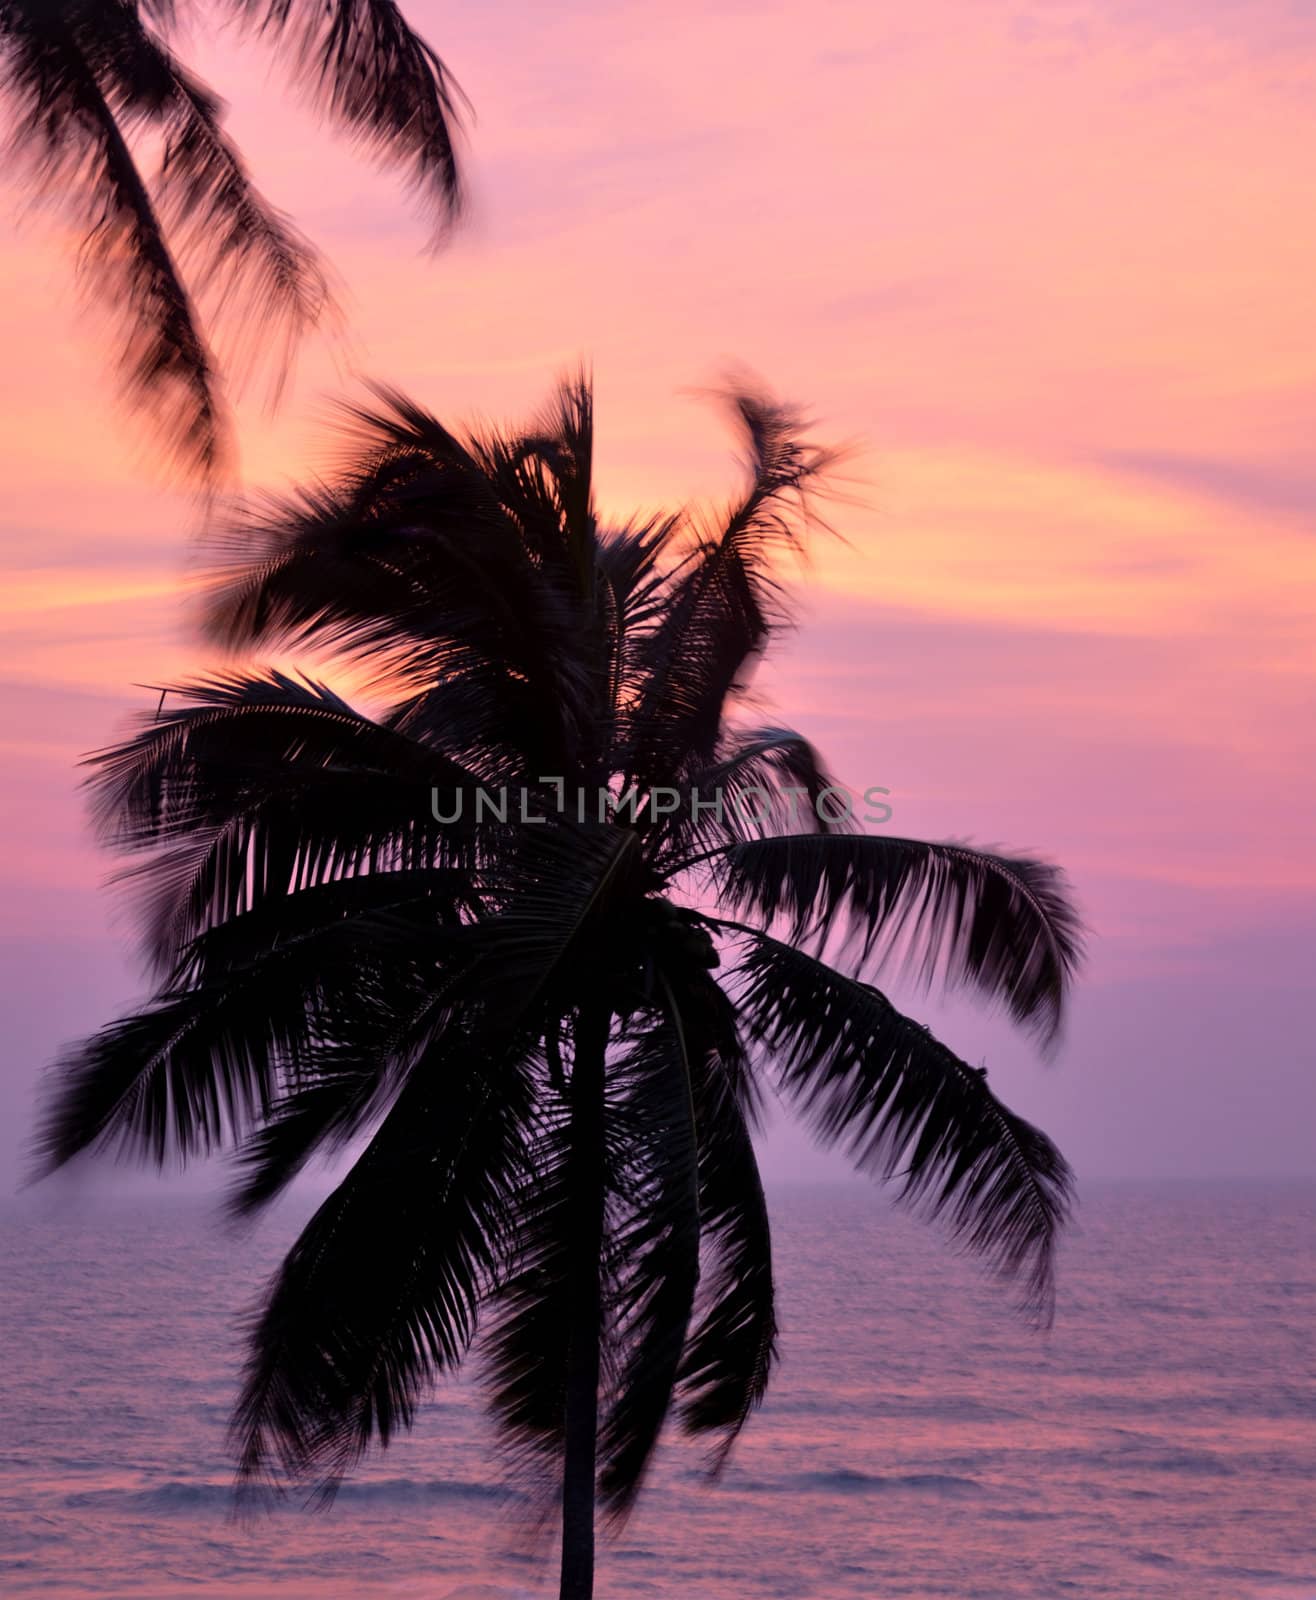 A palm tree at sunset by kdreams02